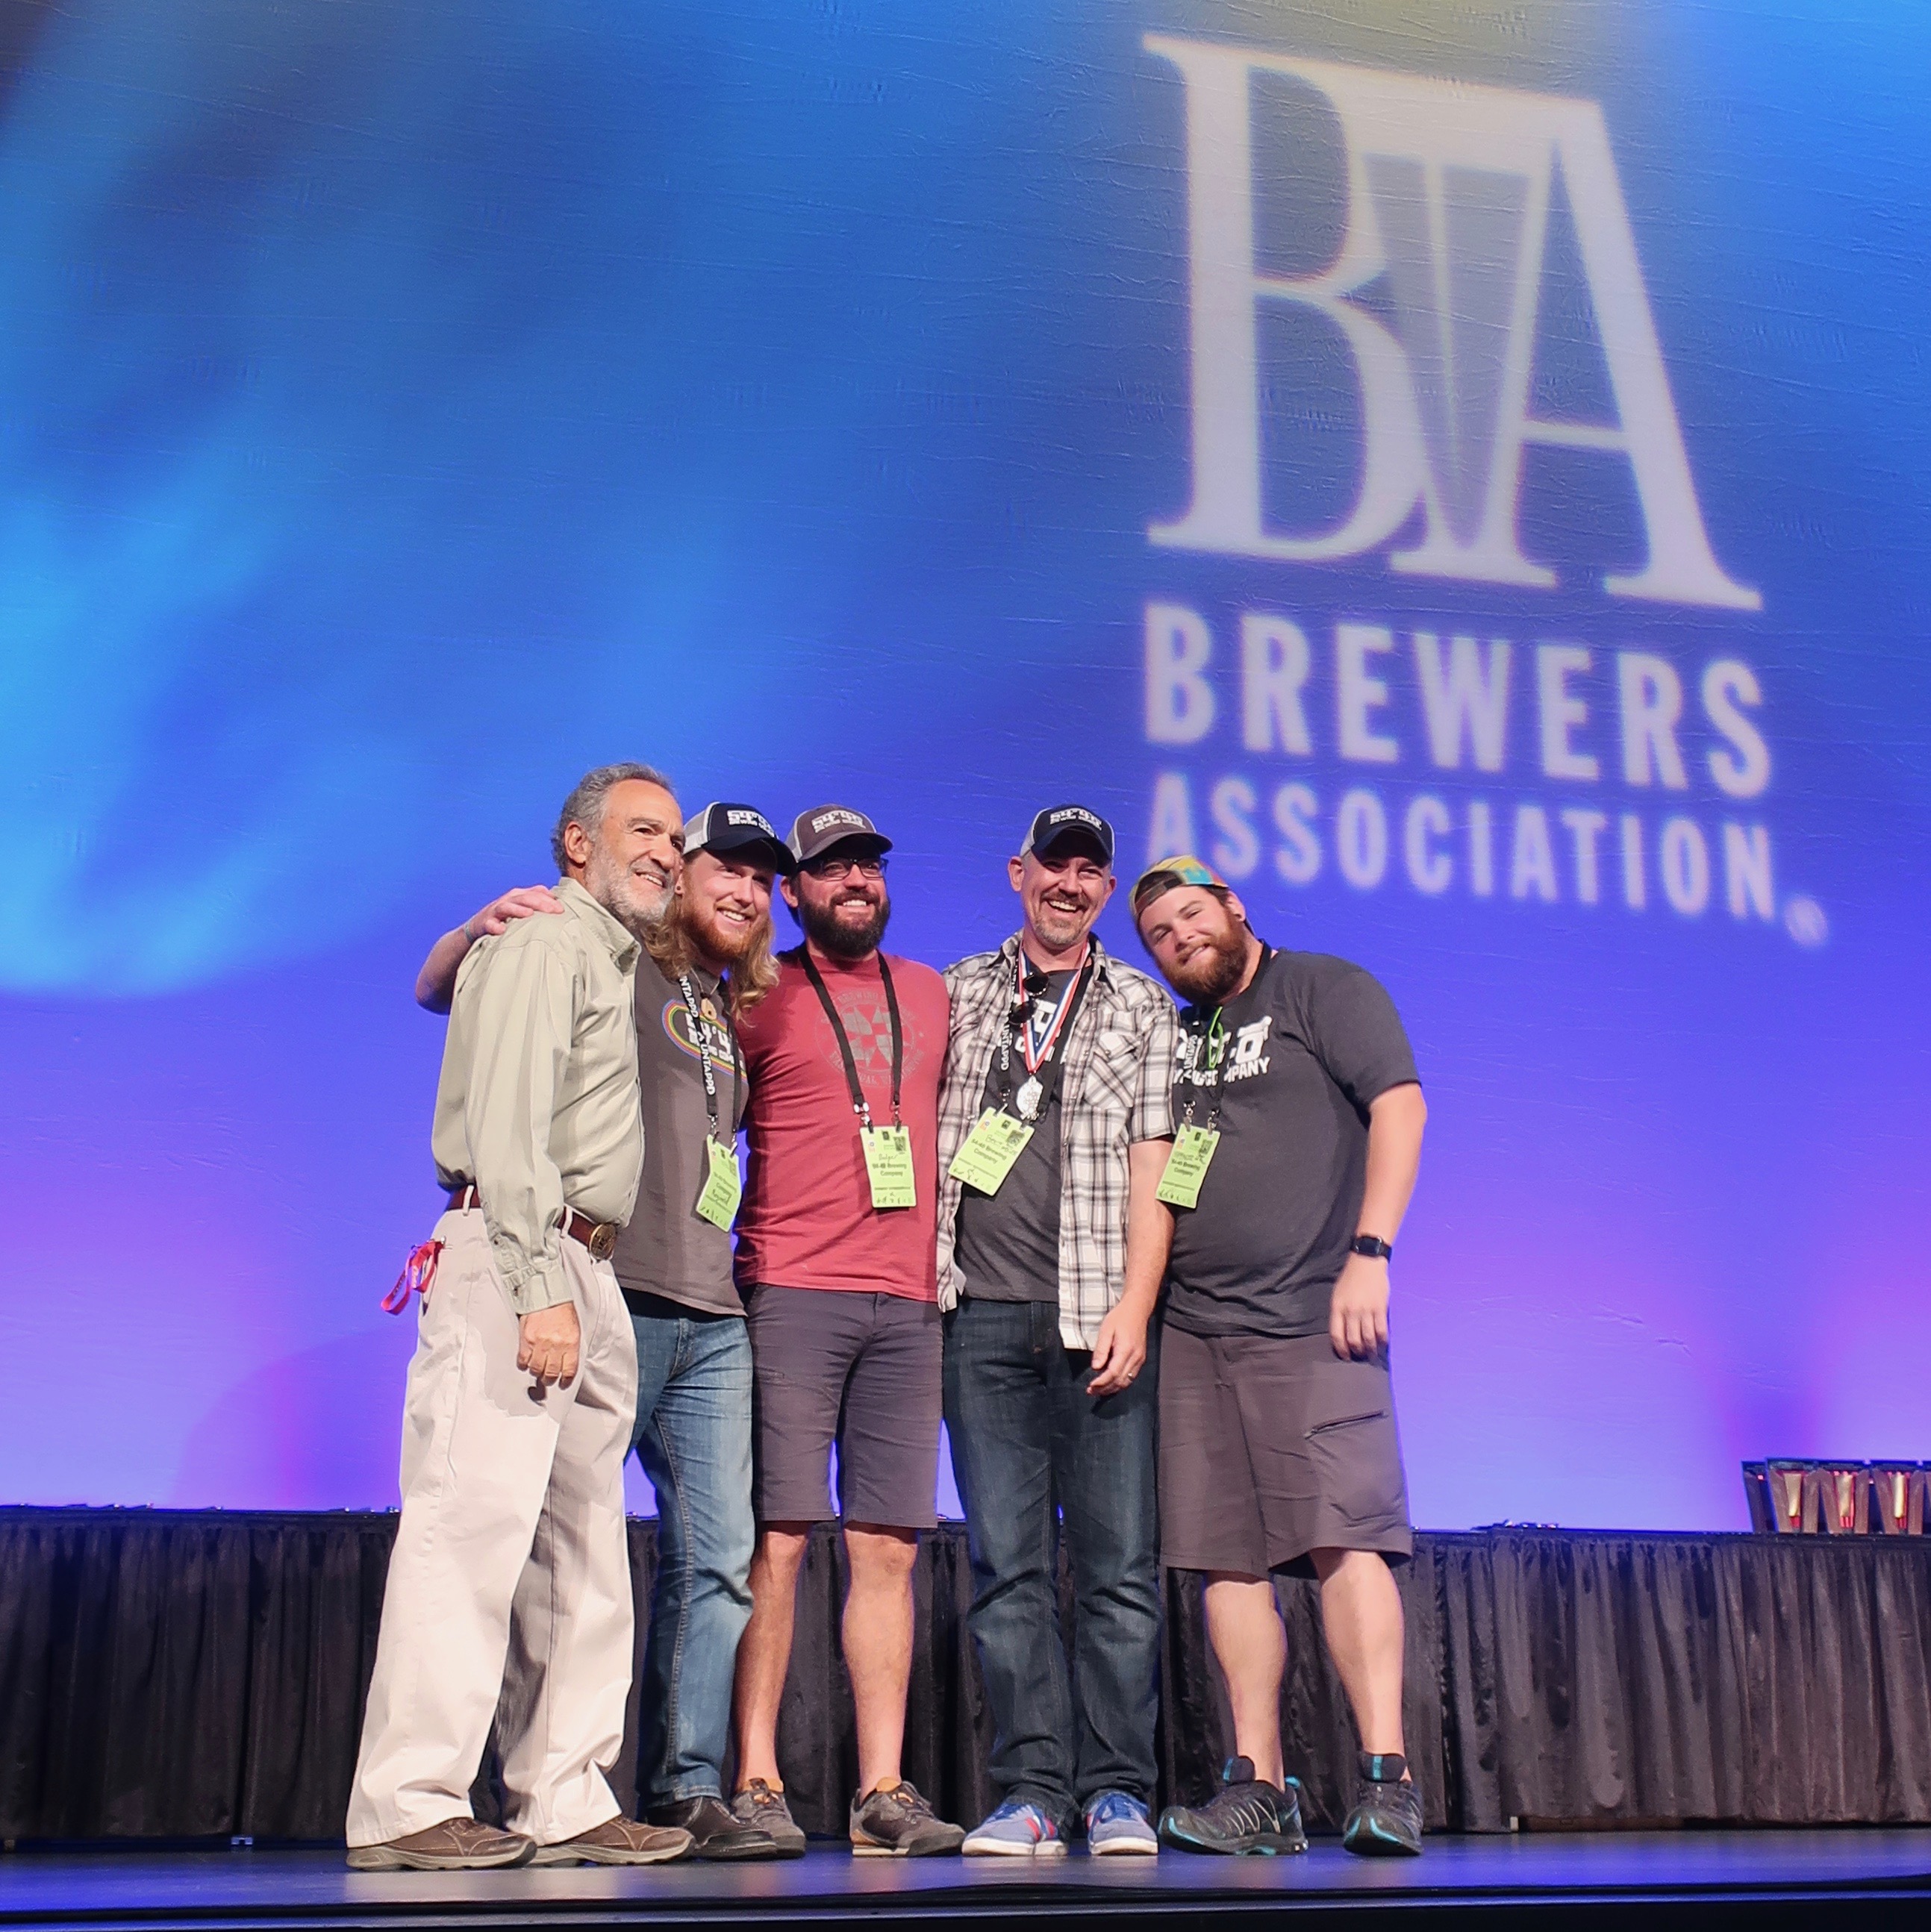 54°40’ Brewing win a Silver Medal at the 2018 Great American Beer Festival.